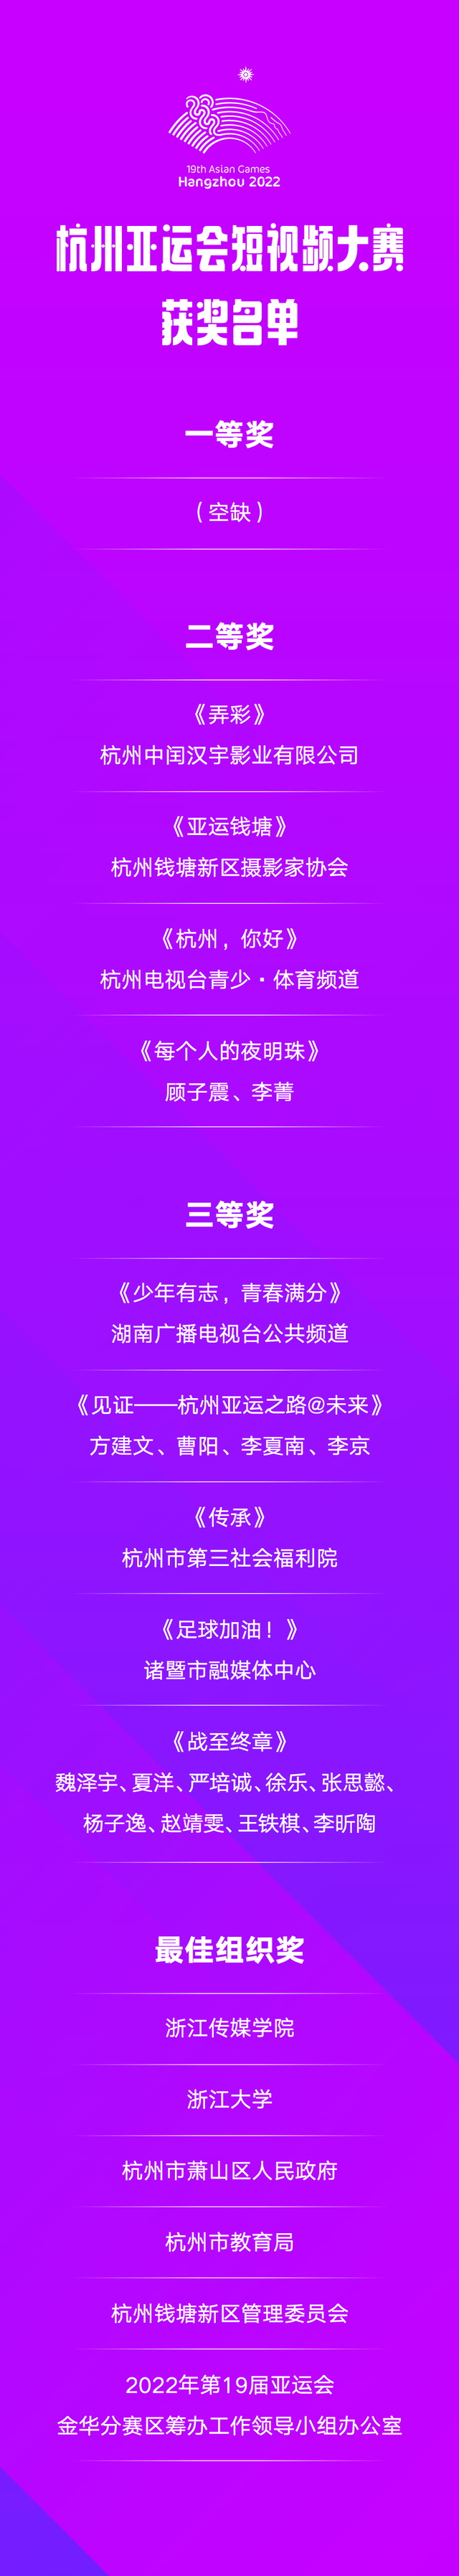 http://img.toumeiw.cn/upload/images/20210726/e36098a04a2a88f319f1079591b45eea.png